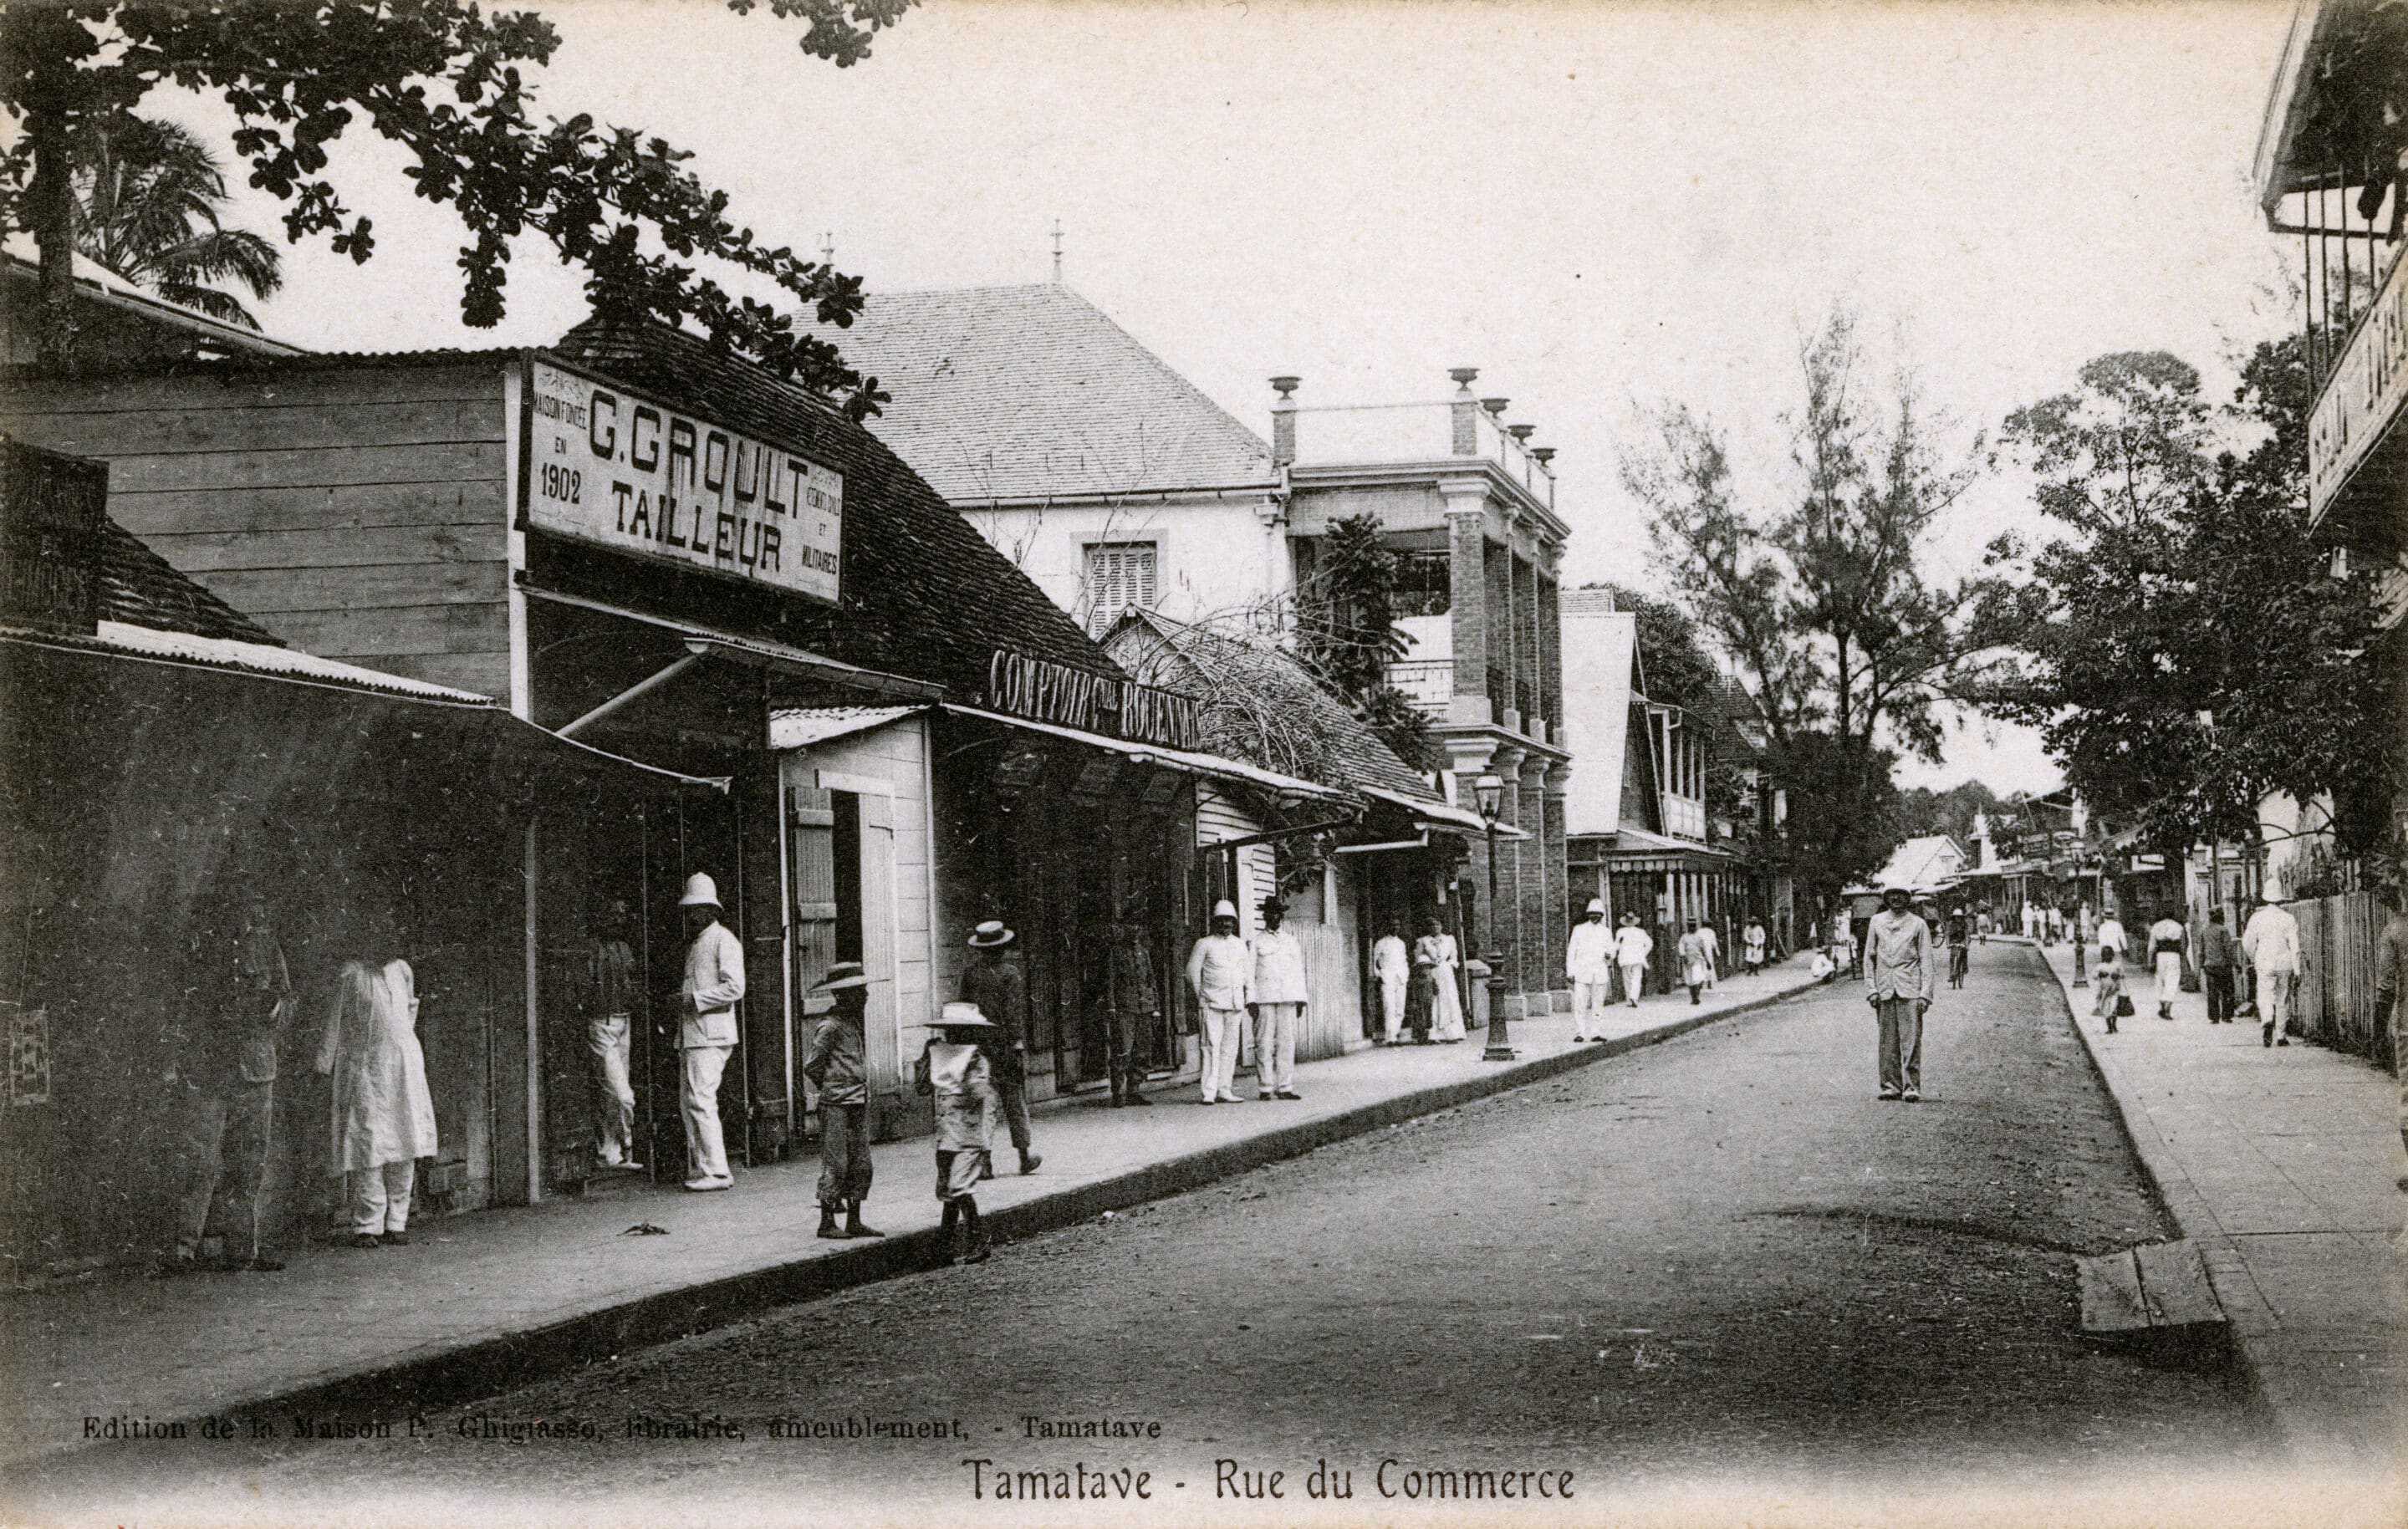 Madagascar - Toamasina (Tamatave) - Rue de Commerce.     Date: circa 1906 - Rights Managed - 11806605 - Credit:  Mary Evans / Grenville Collins P/SIPA - 1804111451